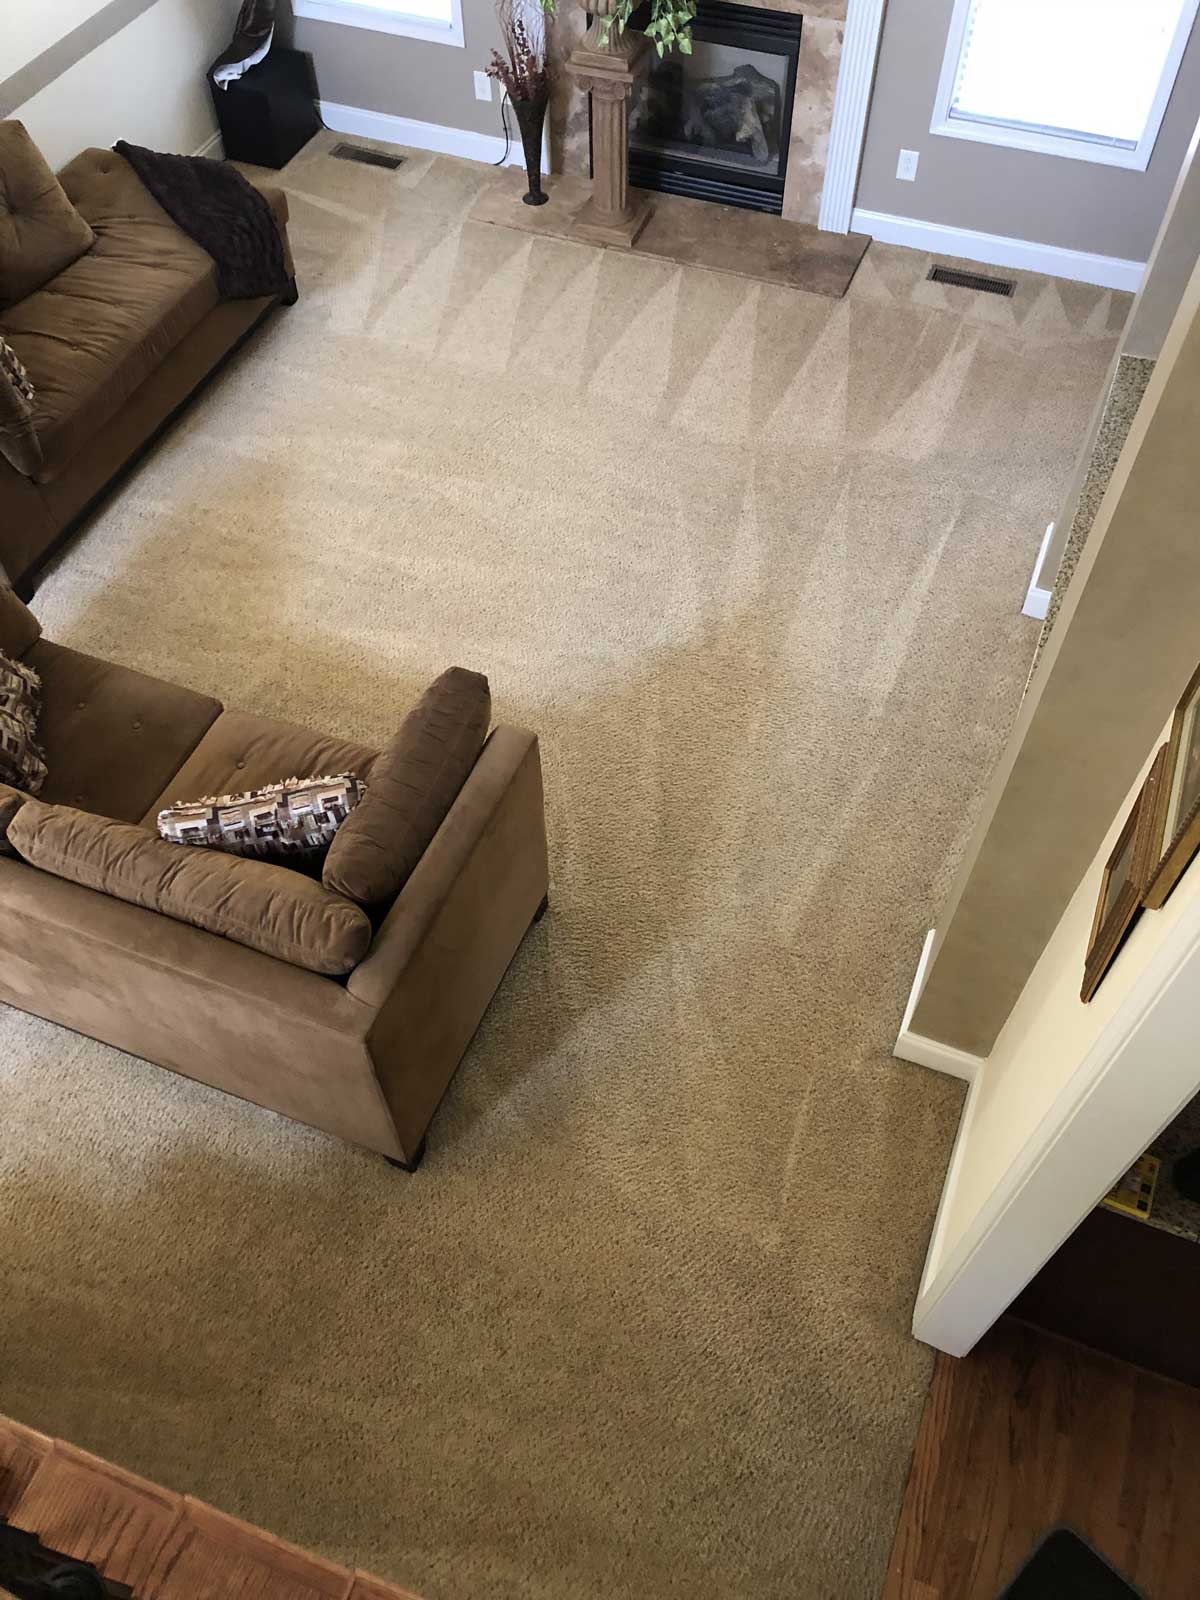 Professional Carpet Cleaning - Southern Floor Solutions - Greg Lovvorn